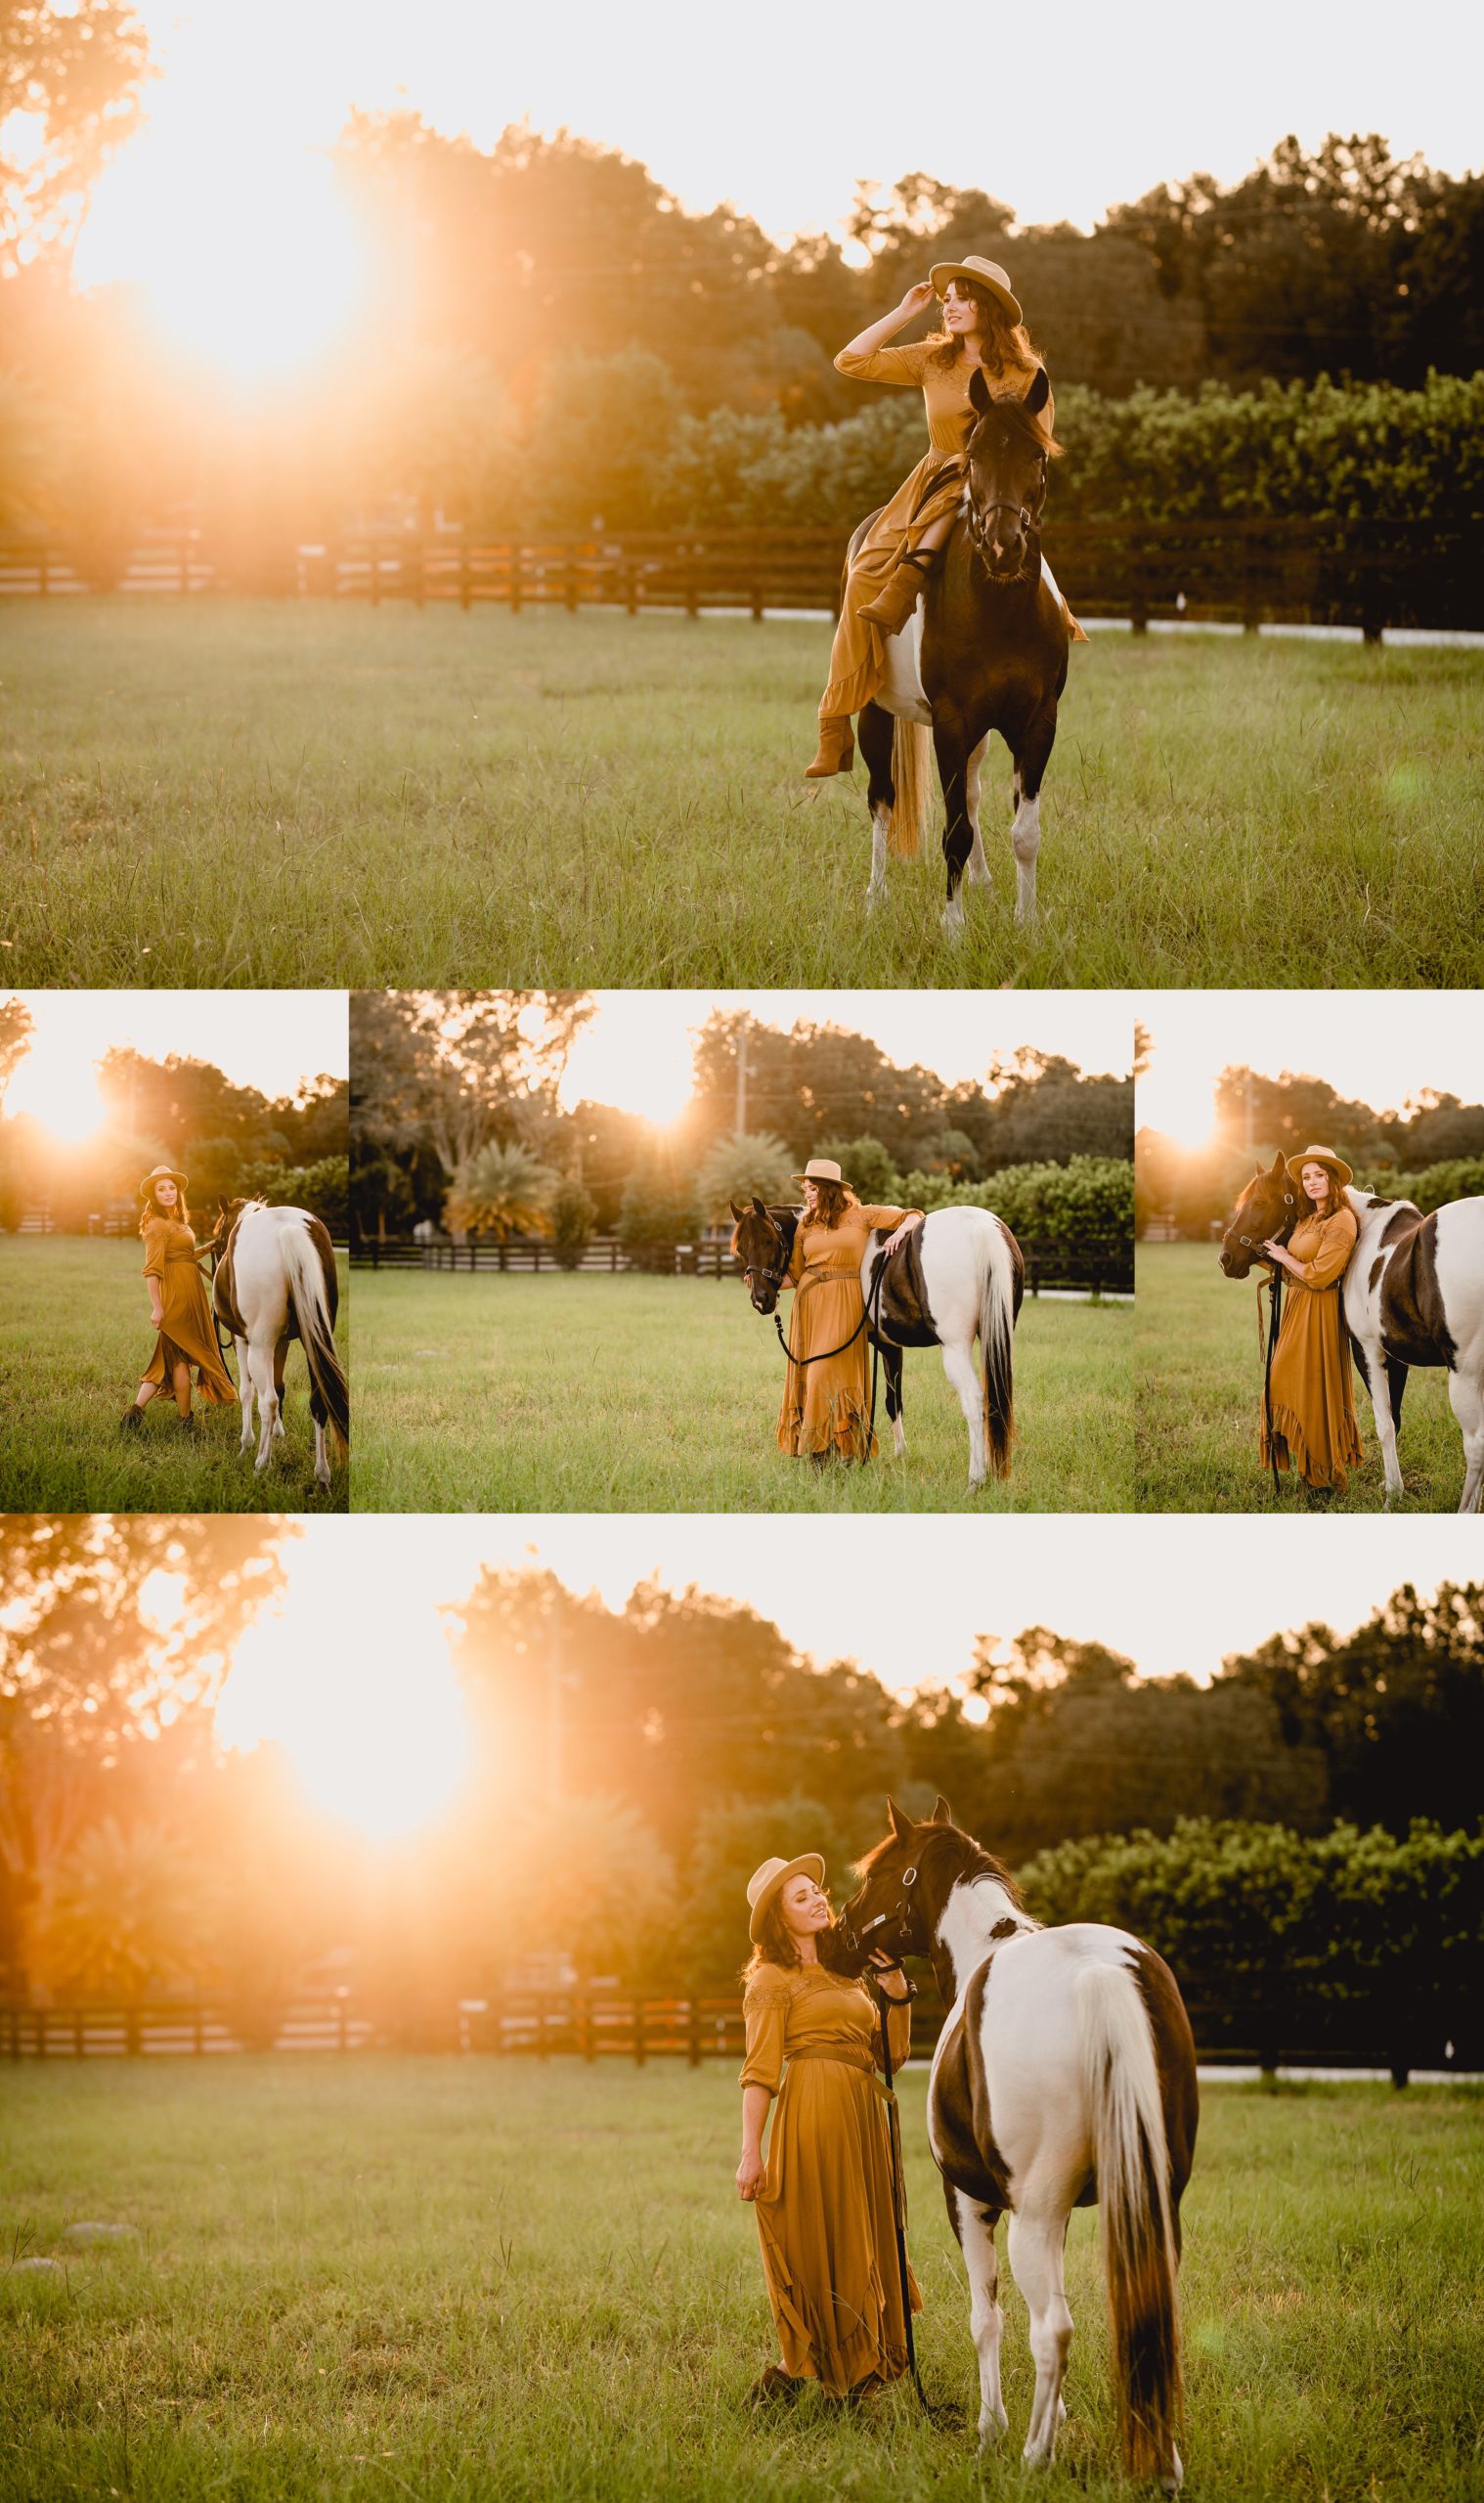 Ocala, FL golden hour photos with girl and her horse taken by professional Florida equine photographer.